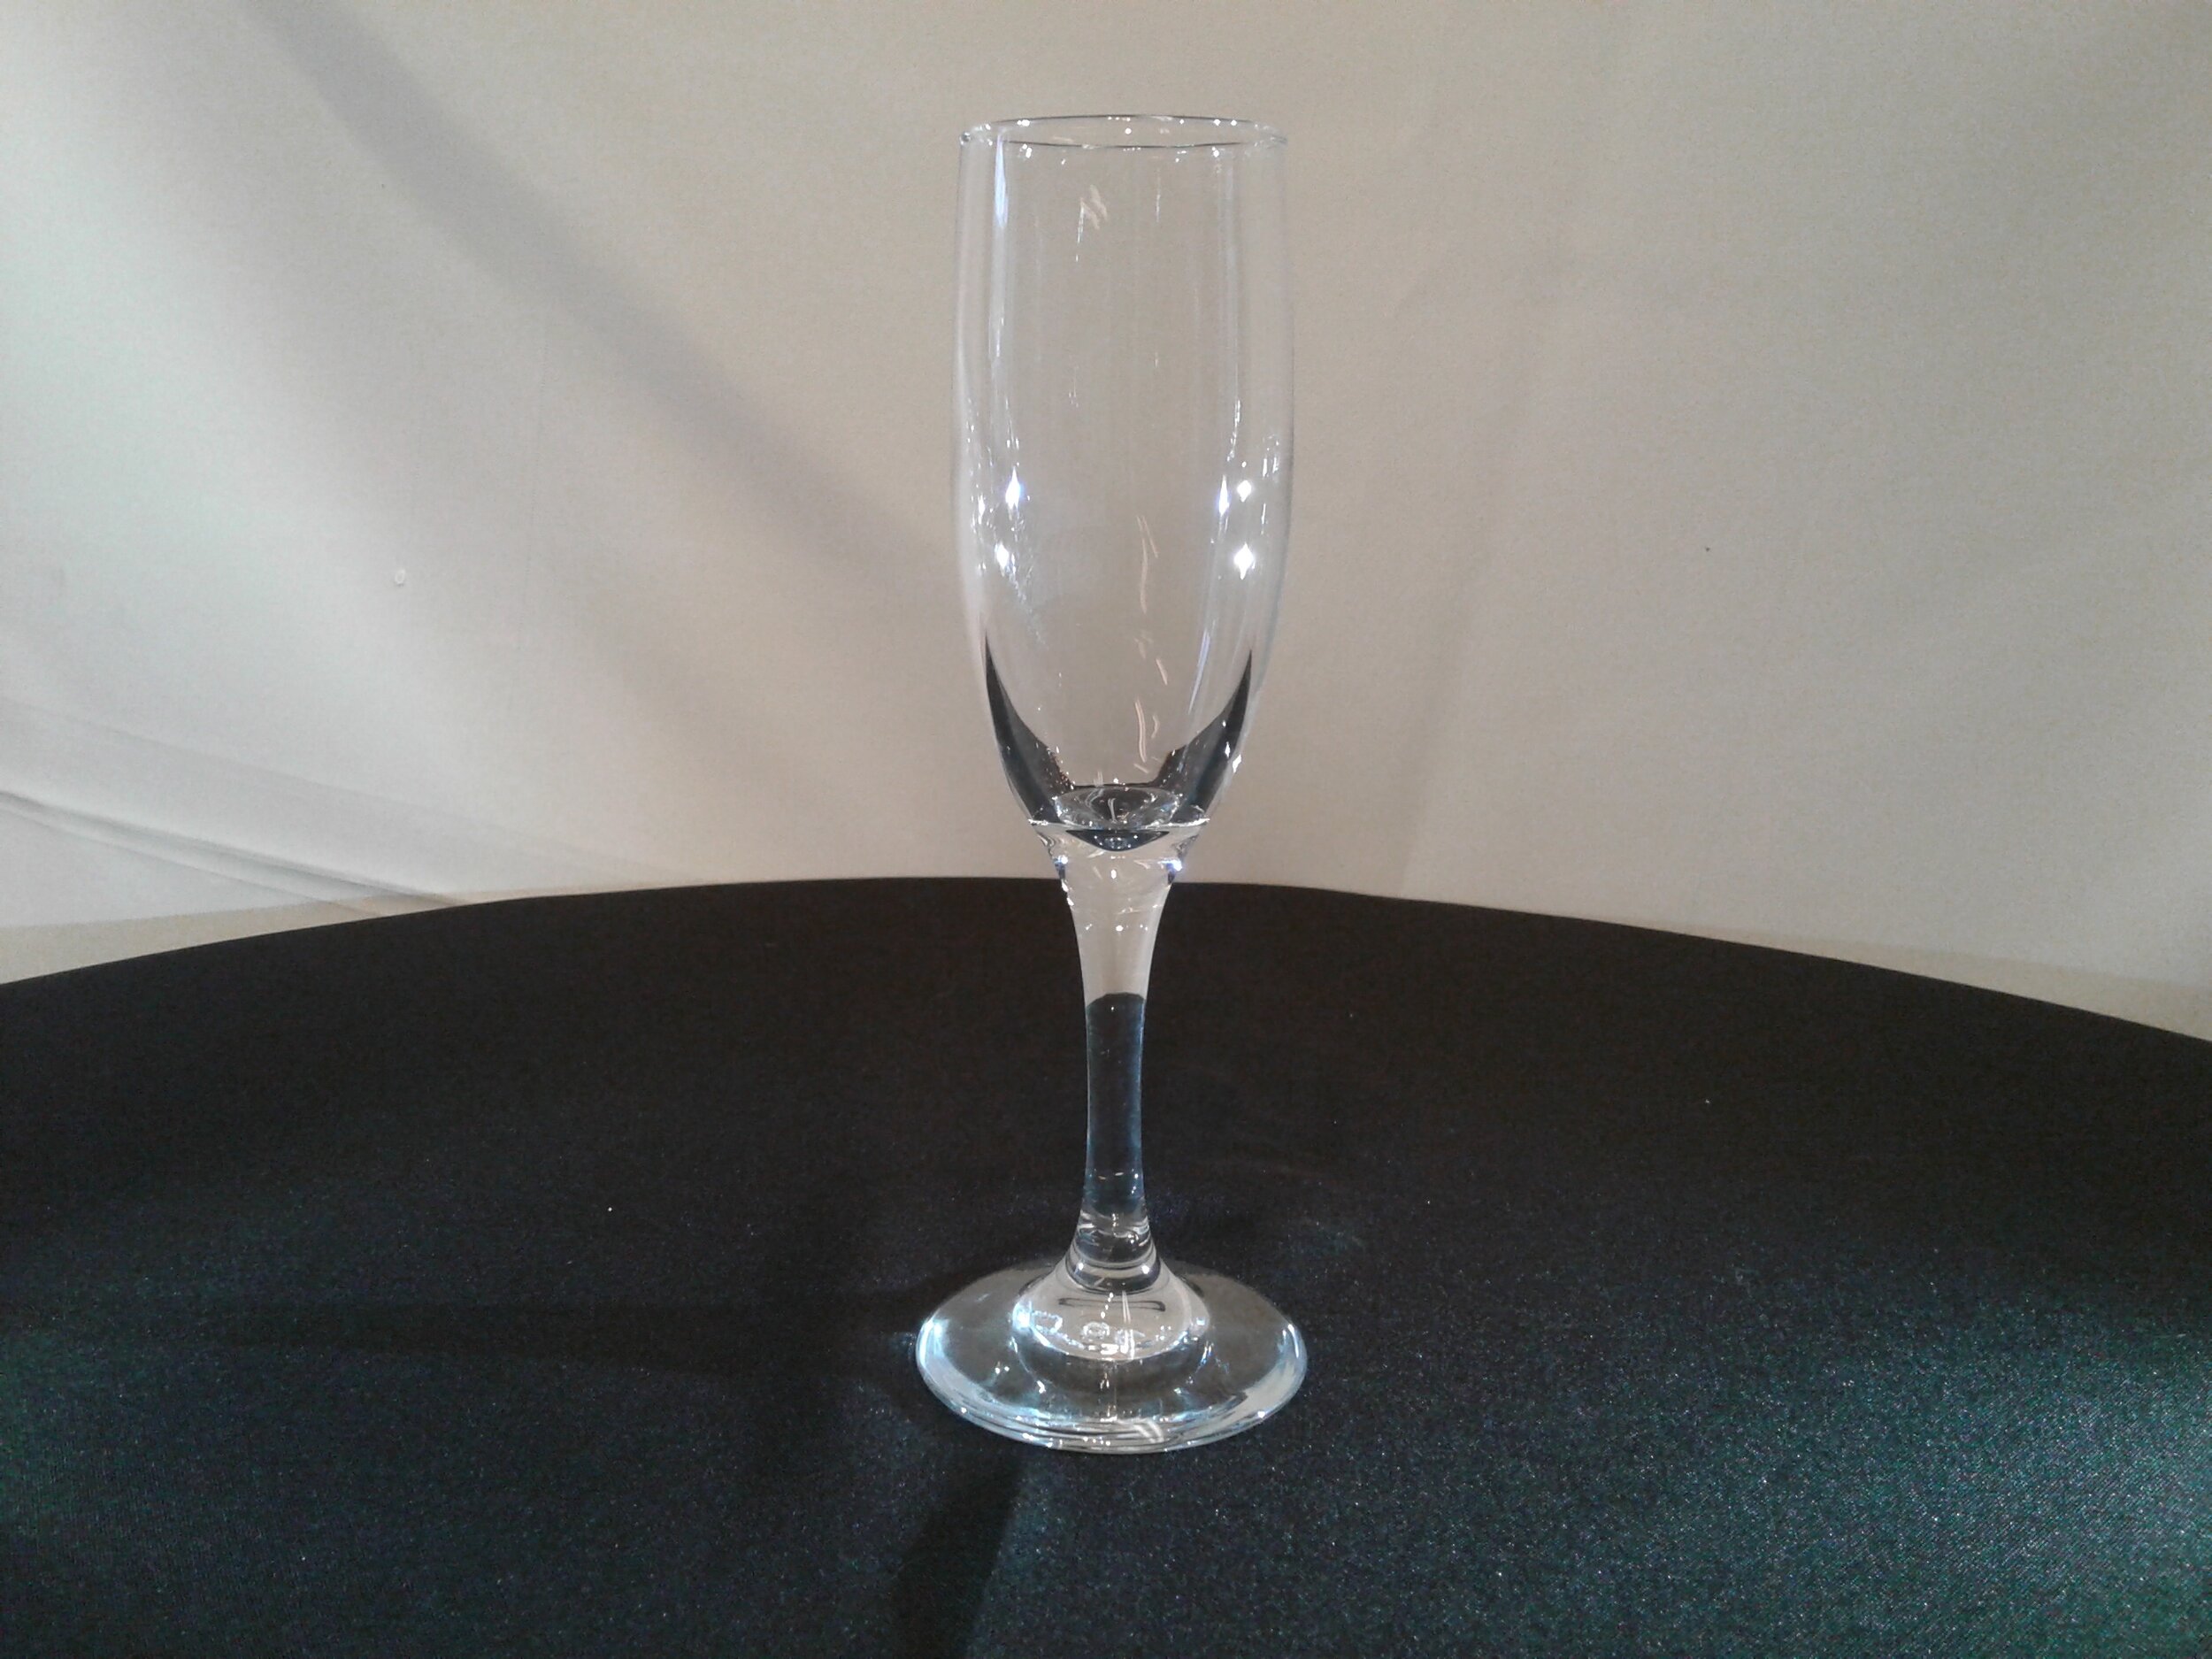 Champagne Flute, $1.25 / day